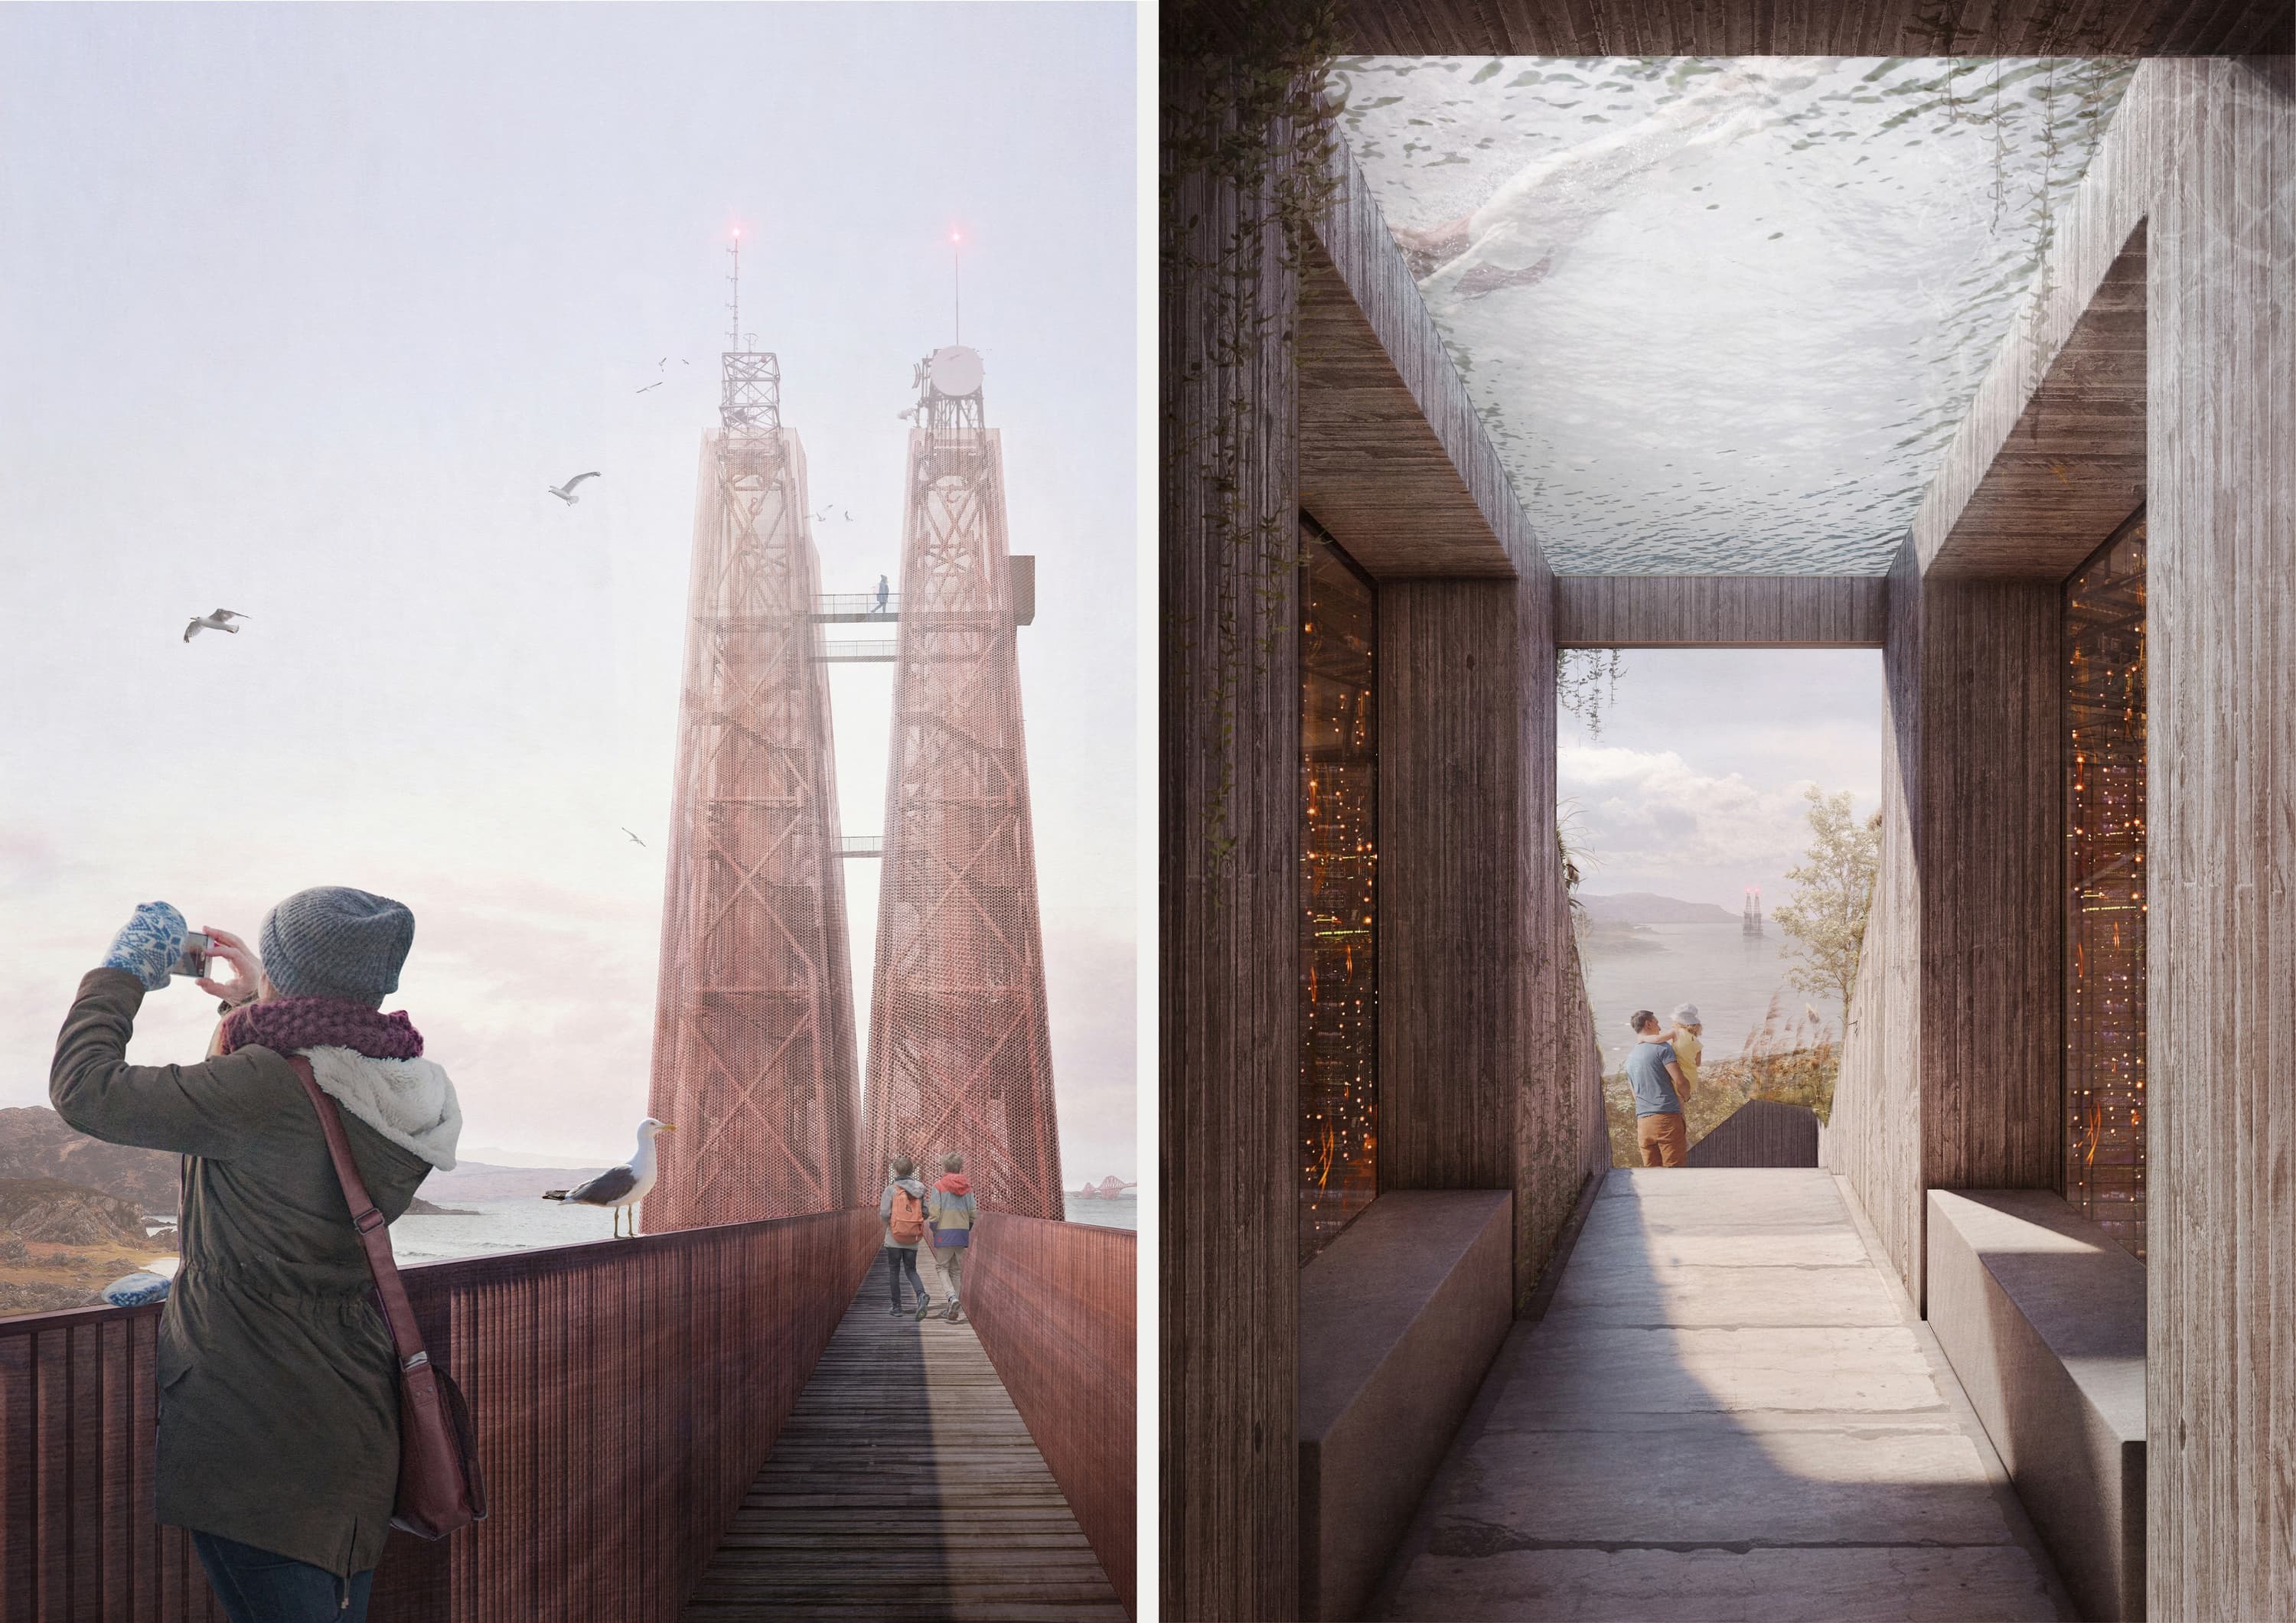 two drawings side by side - on the left hand side a woman looks across a landscape in front of two towers and on the right there is a corridor leading to a viewing platform